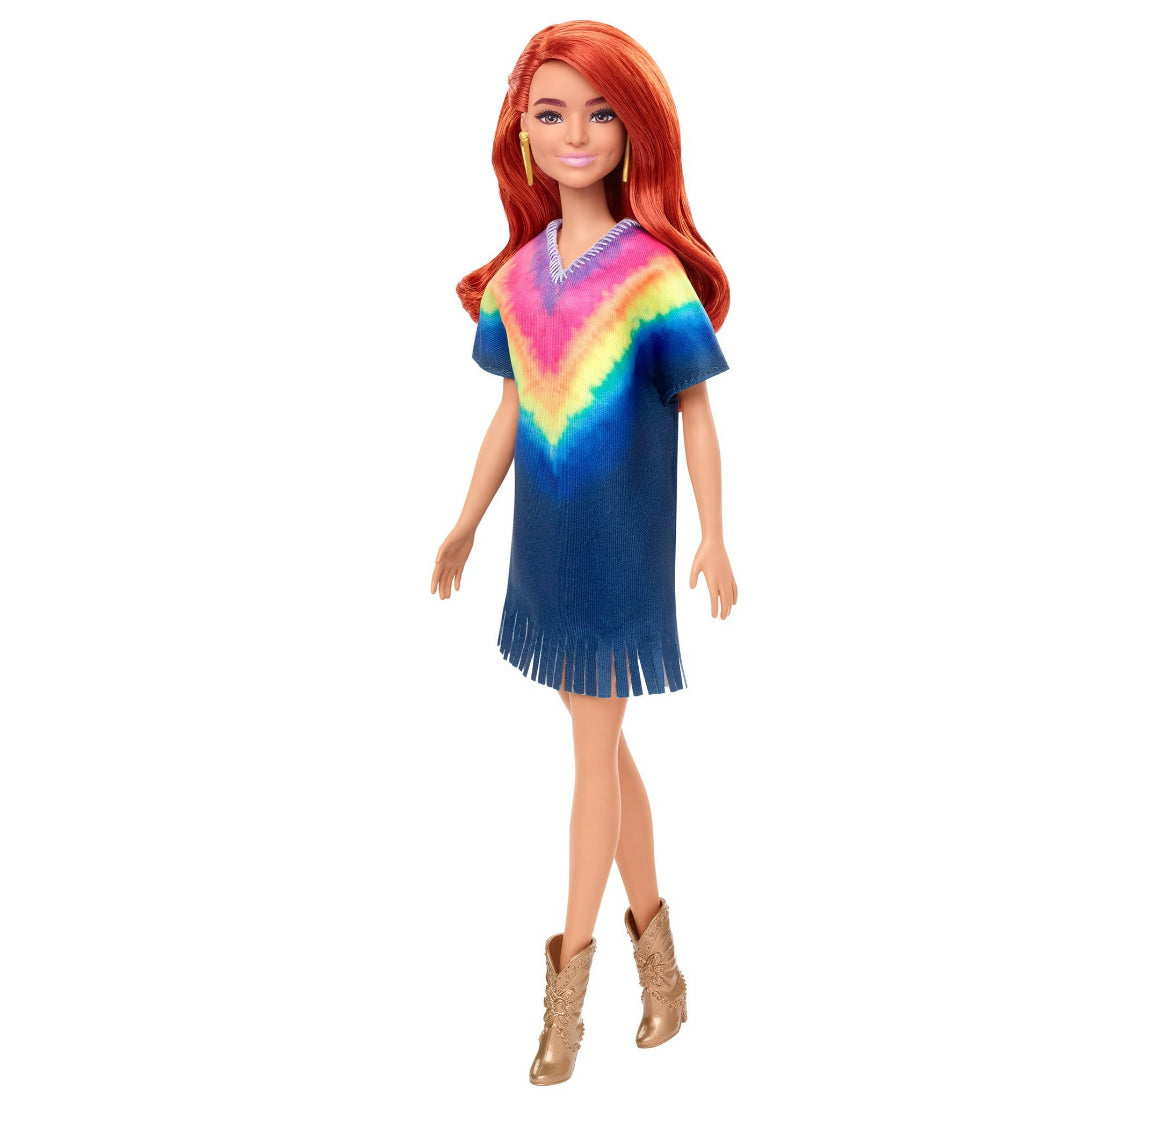 Barbie Fashionistas Doll #141 with Long Red Hair Wearing Tie-Dye Fringe Dress